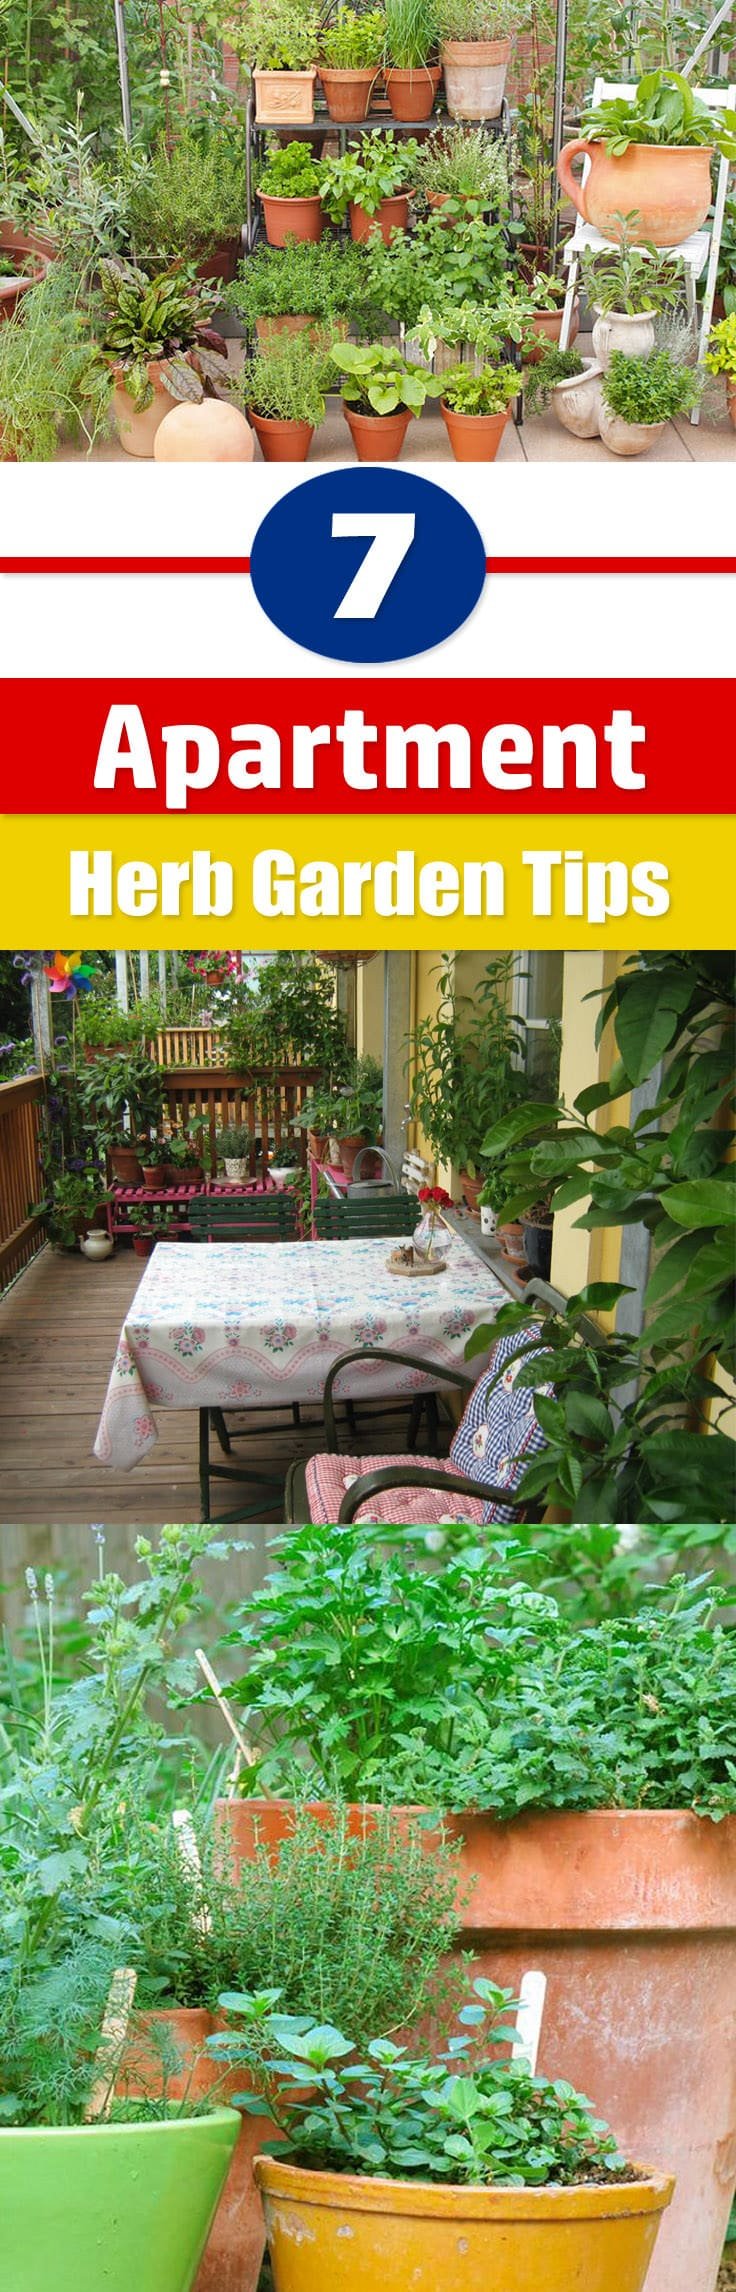 Start apartment gardening if you live in a city and don't have space for a regular garden with these 7 Apartment Herb Garden Tips.